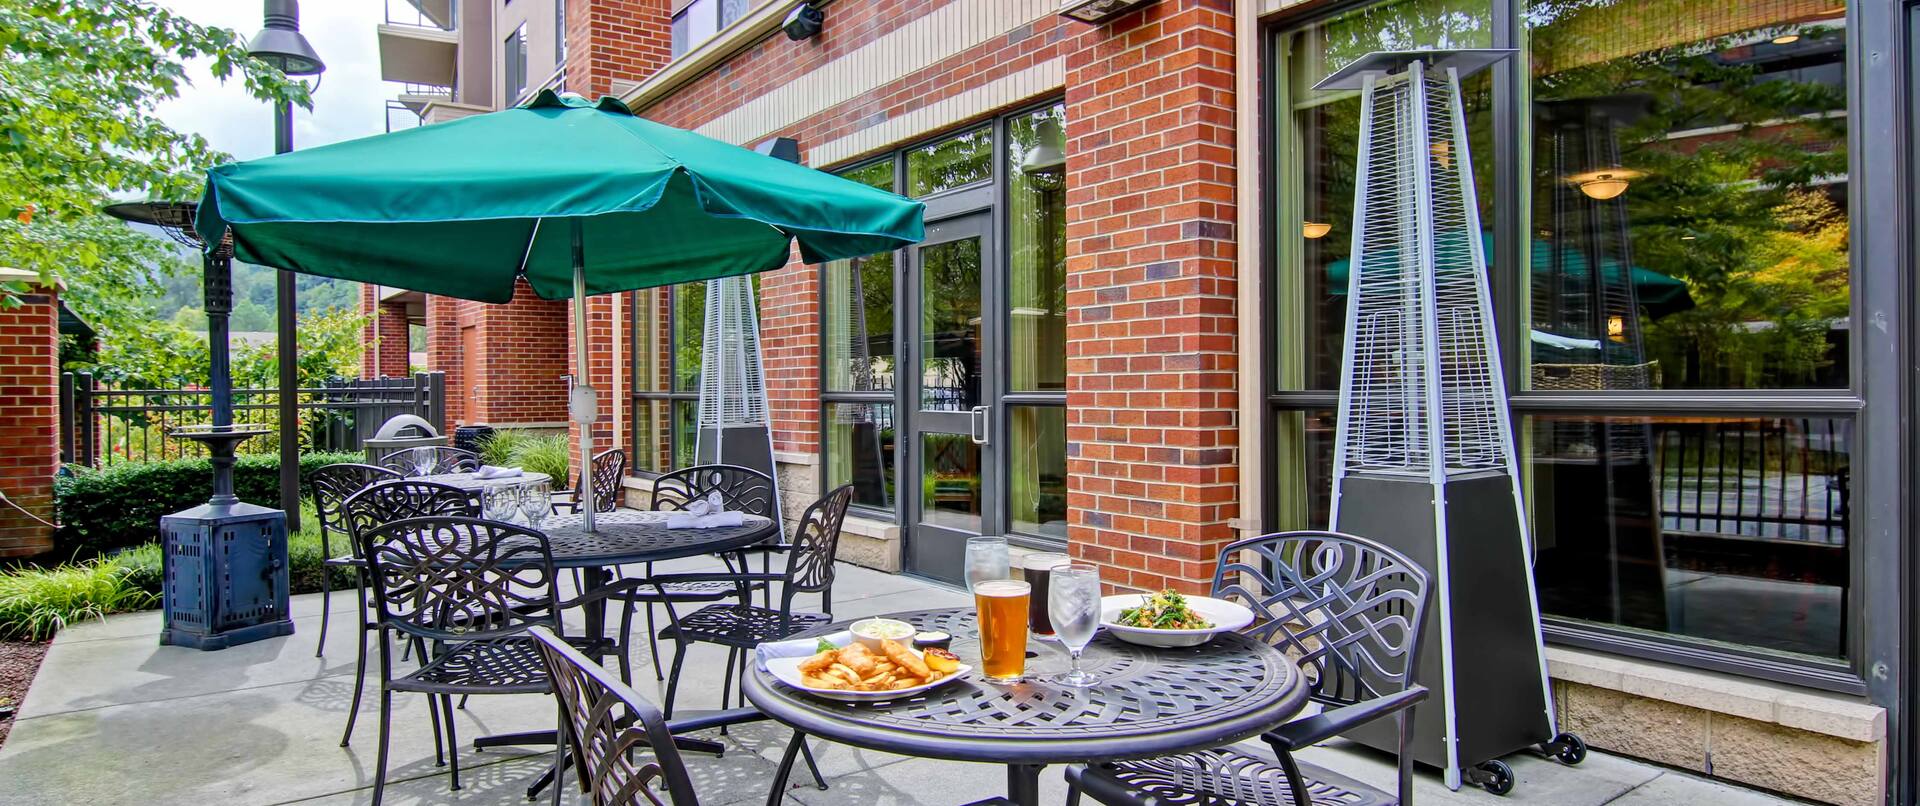 Green Umbrella, Table With Plates of Food and Drinks, Chairs, and Heat Lanterns on Patio by Hotel Exterior